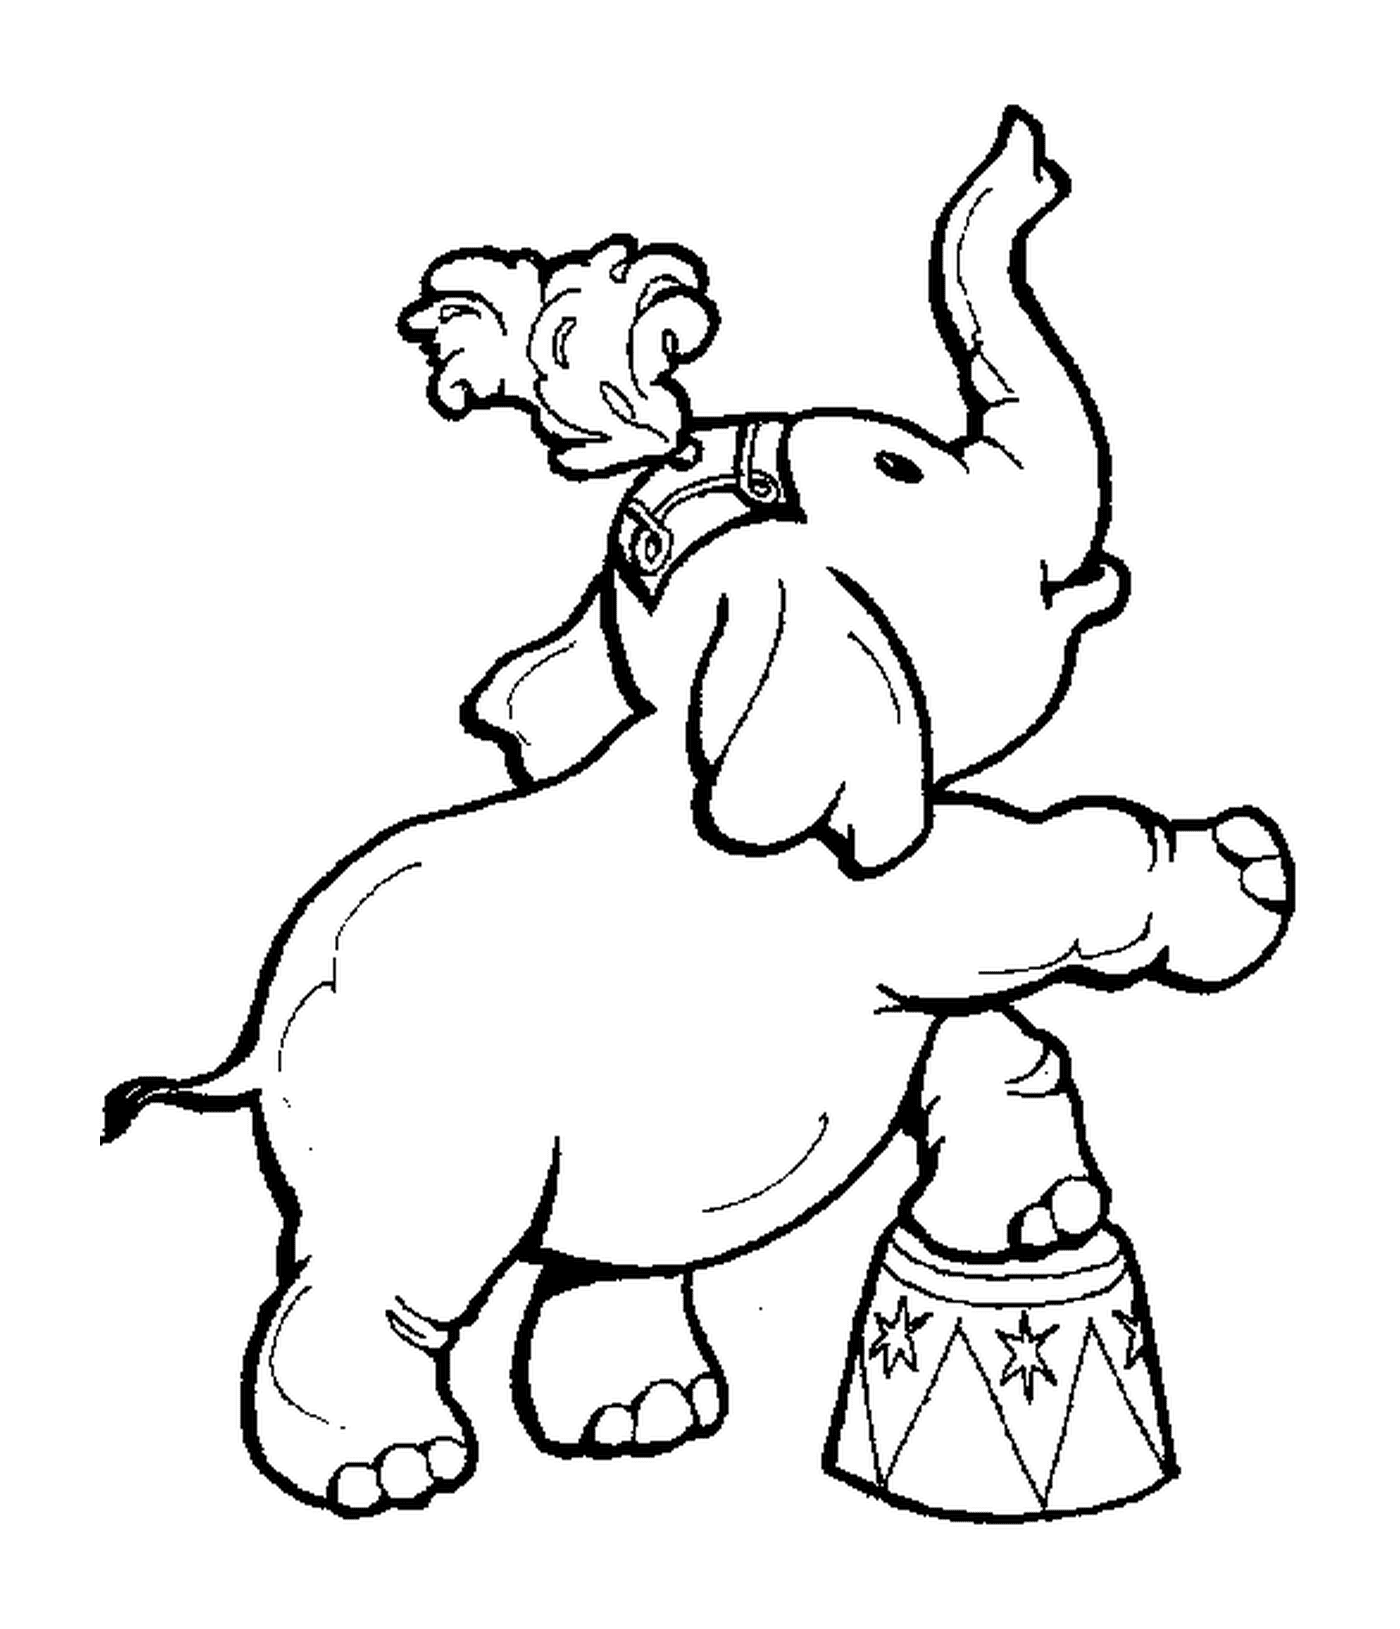  An elephant standing on a drum 